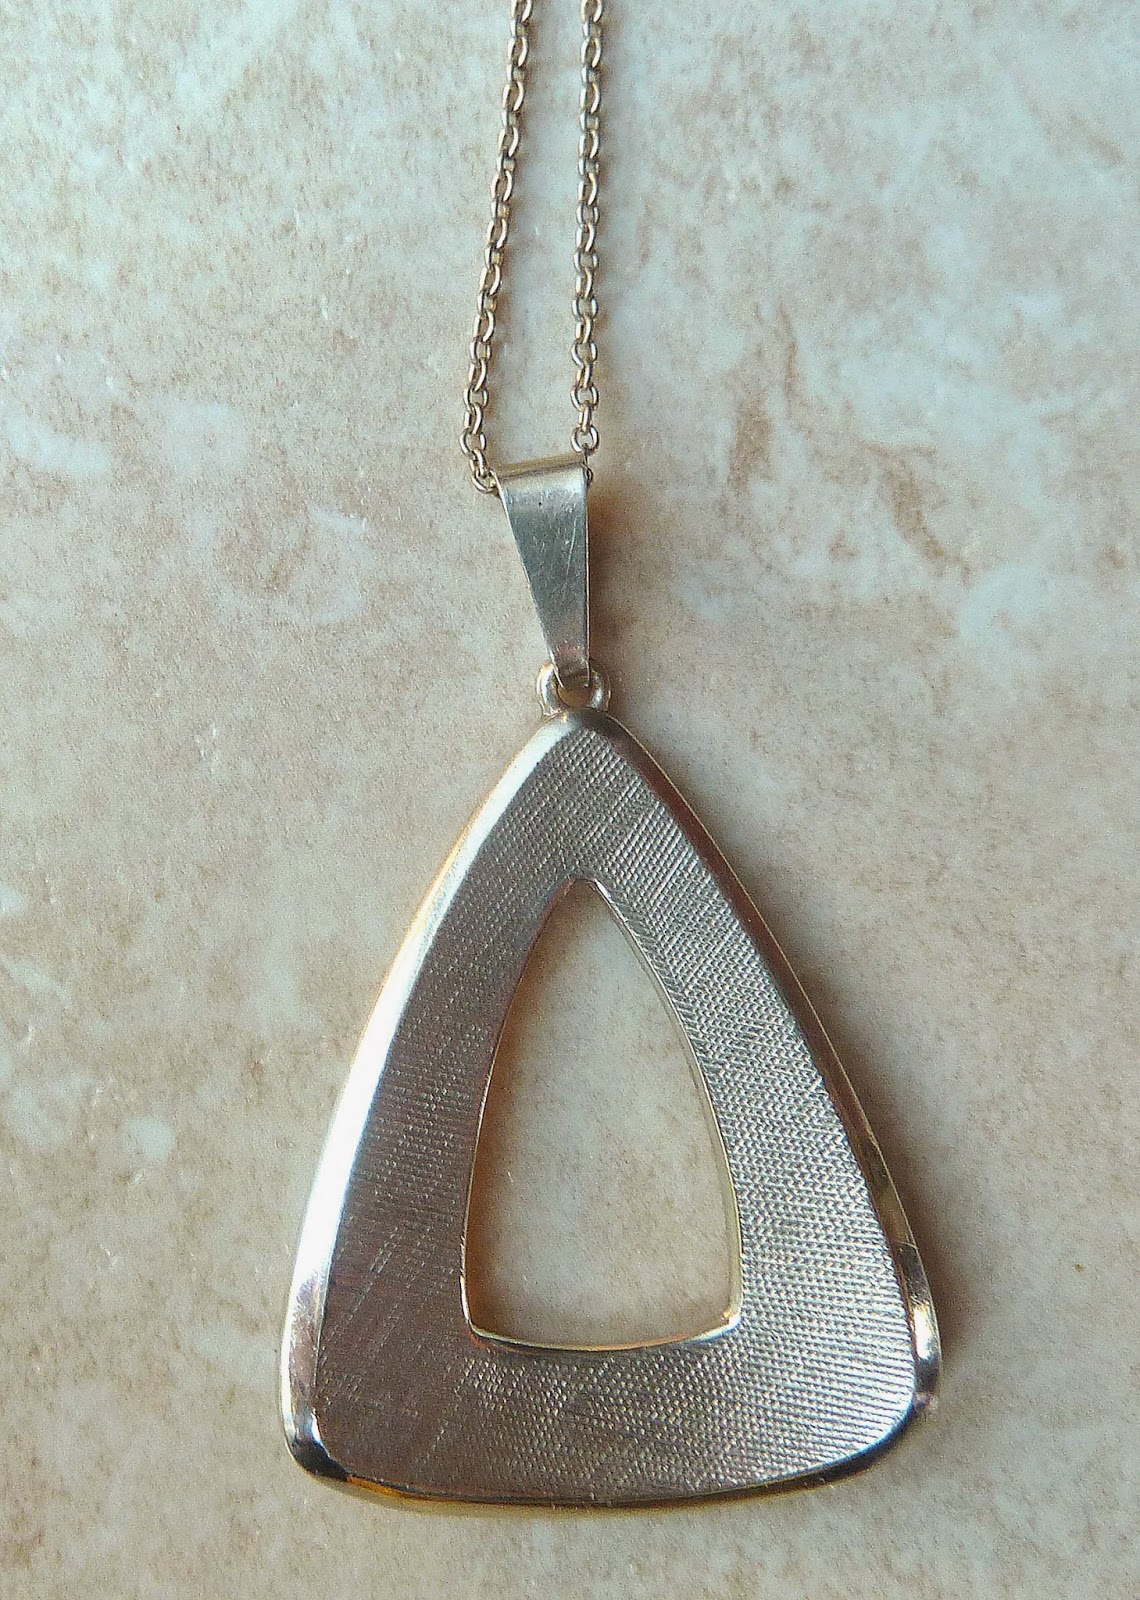 http://www.kcavintagegems.uk/vintage-modernist-style-sterling-silver-triangle-pendant-and-chain-335-p.asp